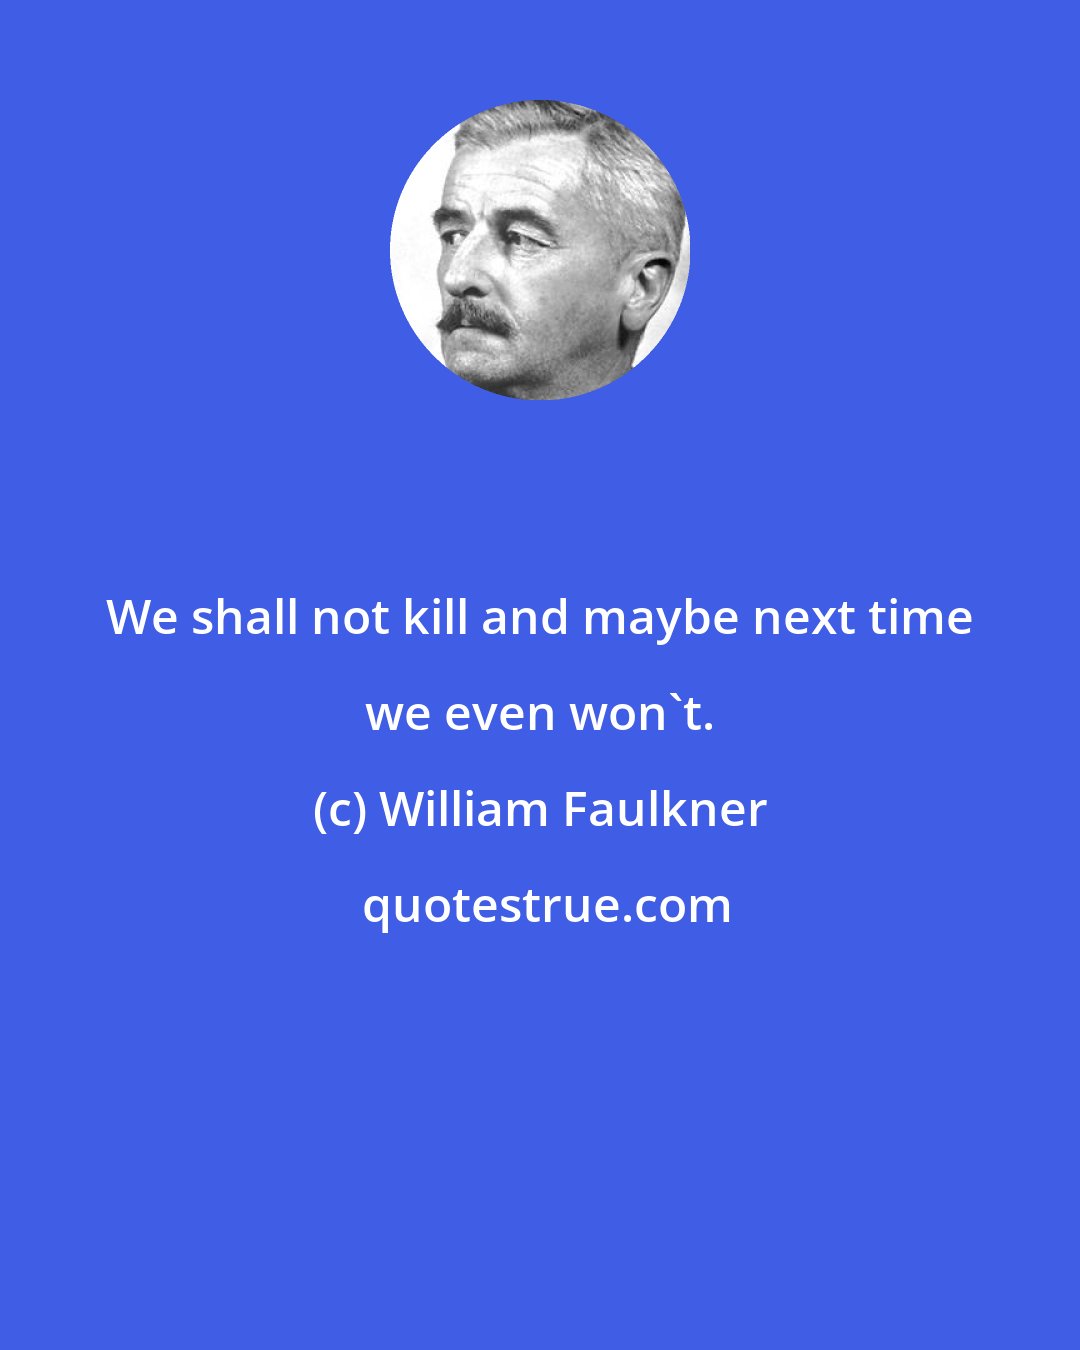 William Faulkner: We shall not kill and maybe next time we even won't.